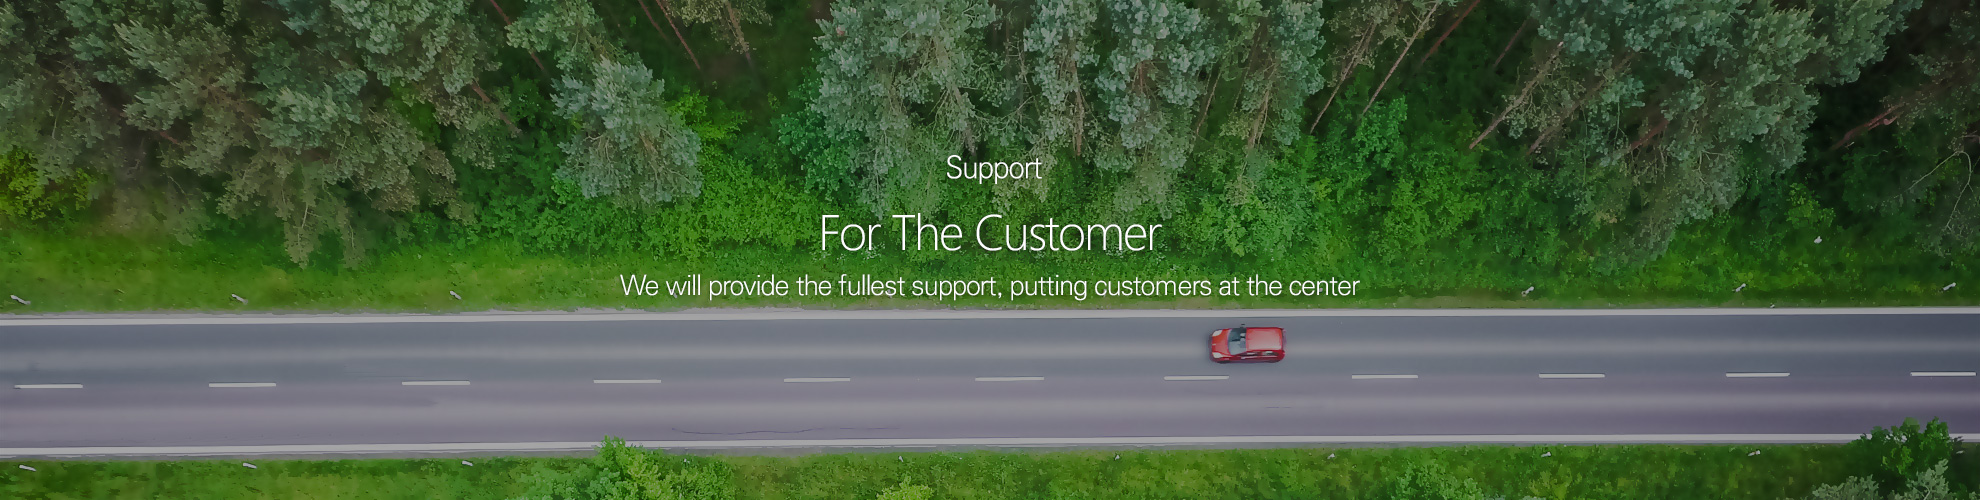 Customer Center - For The Customer We will provide the fullest support, putting customers at the center.